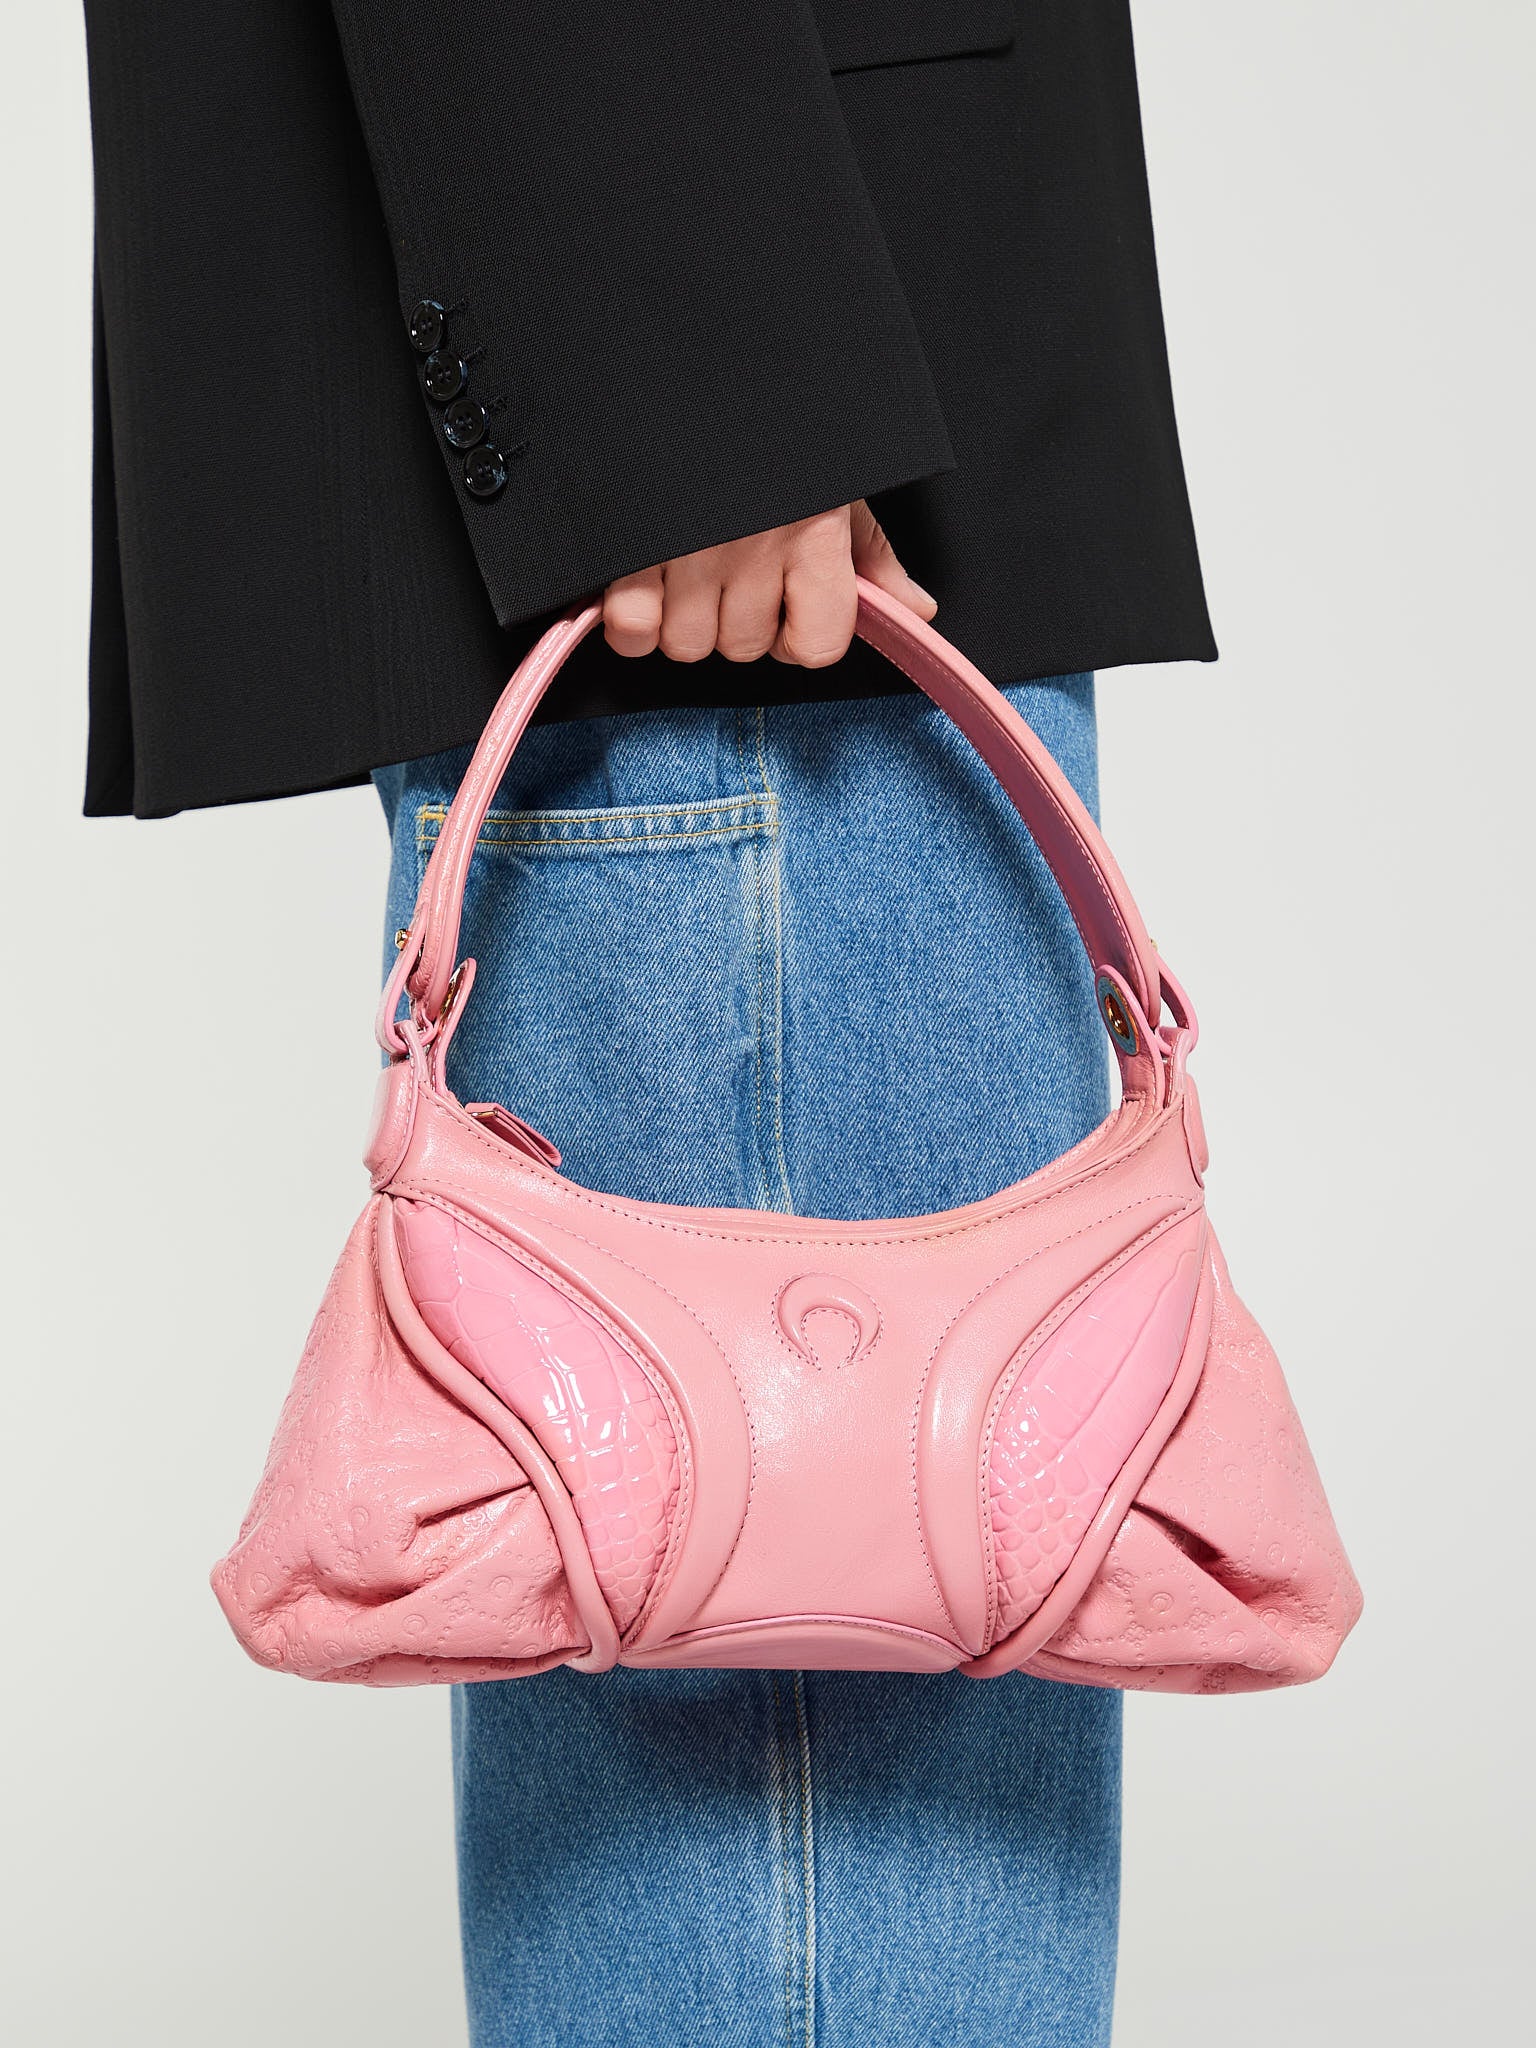 Embossed Leather Stardust Bag in Pink